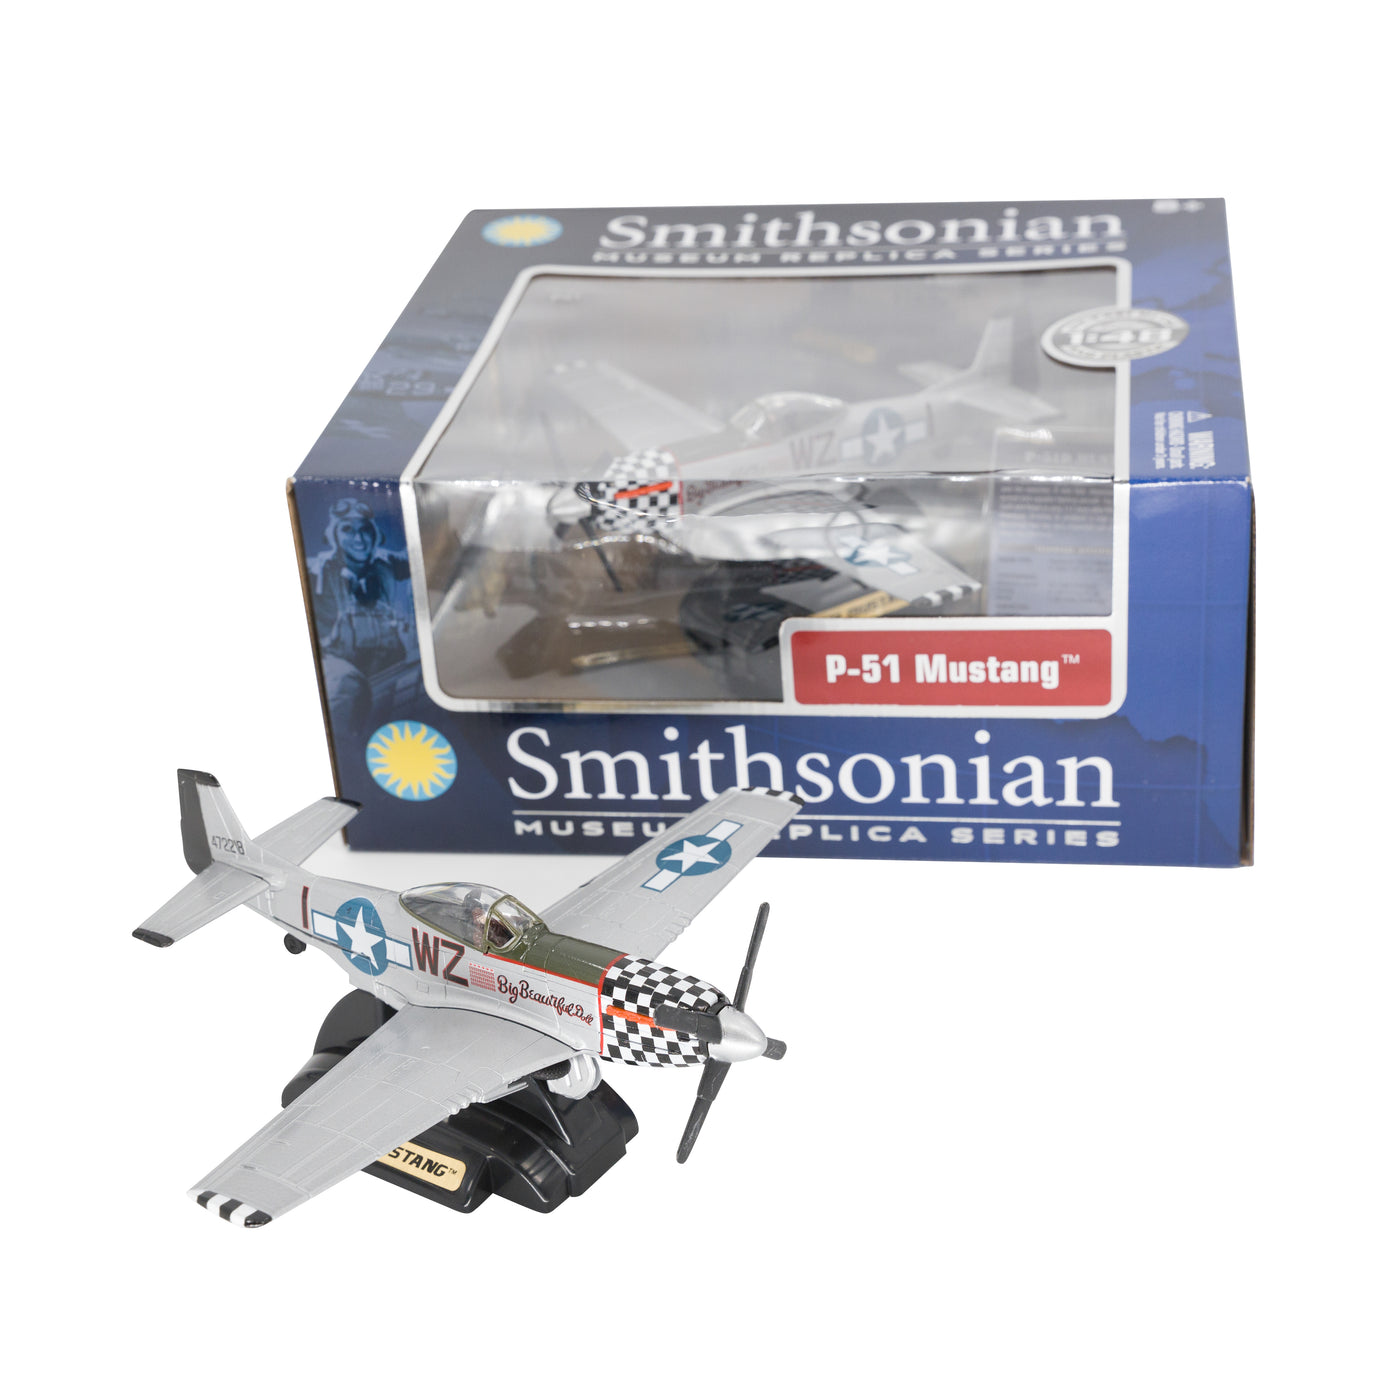 Smithsonian 1:48 Scale Large Diecast Metal Model, P-51D Mustang